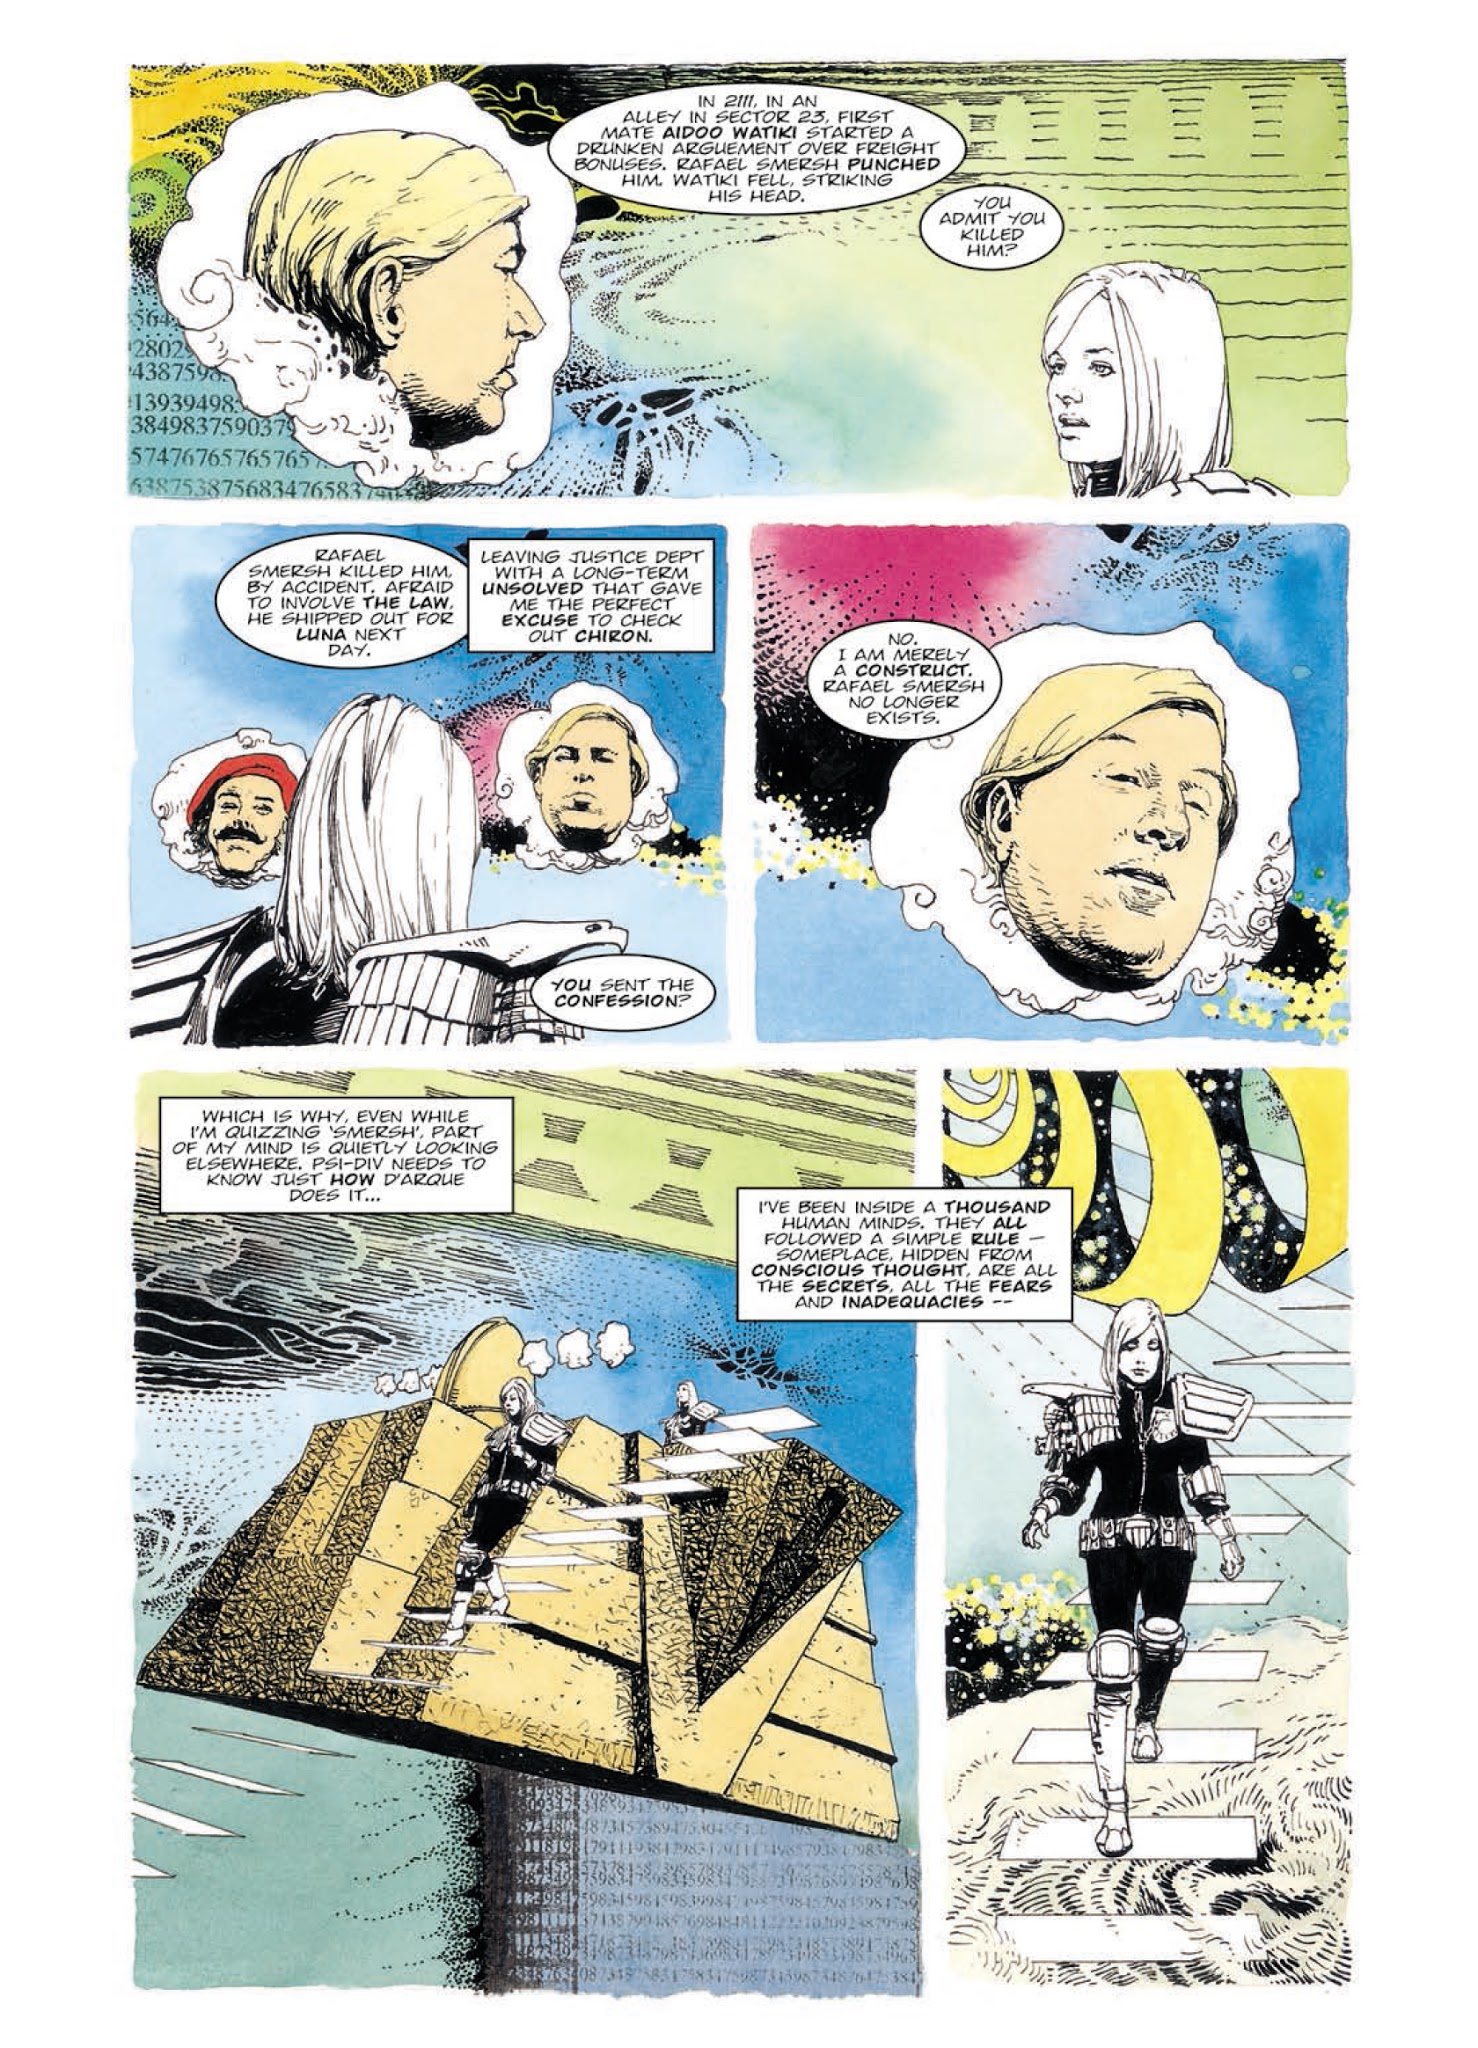 Read online Judge Anderson: The Psi Files comic -  Issue # TPB 4 - 53